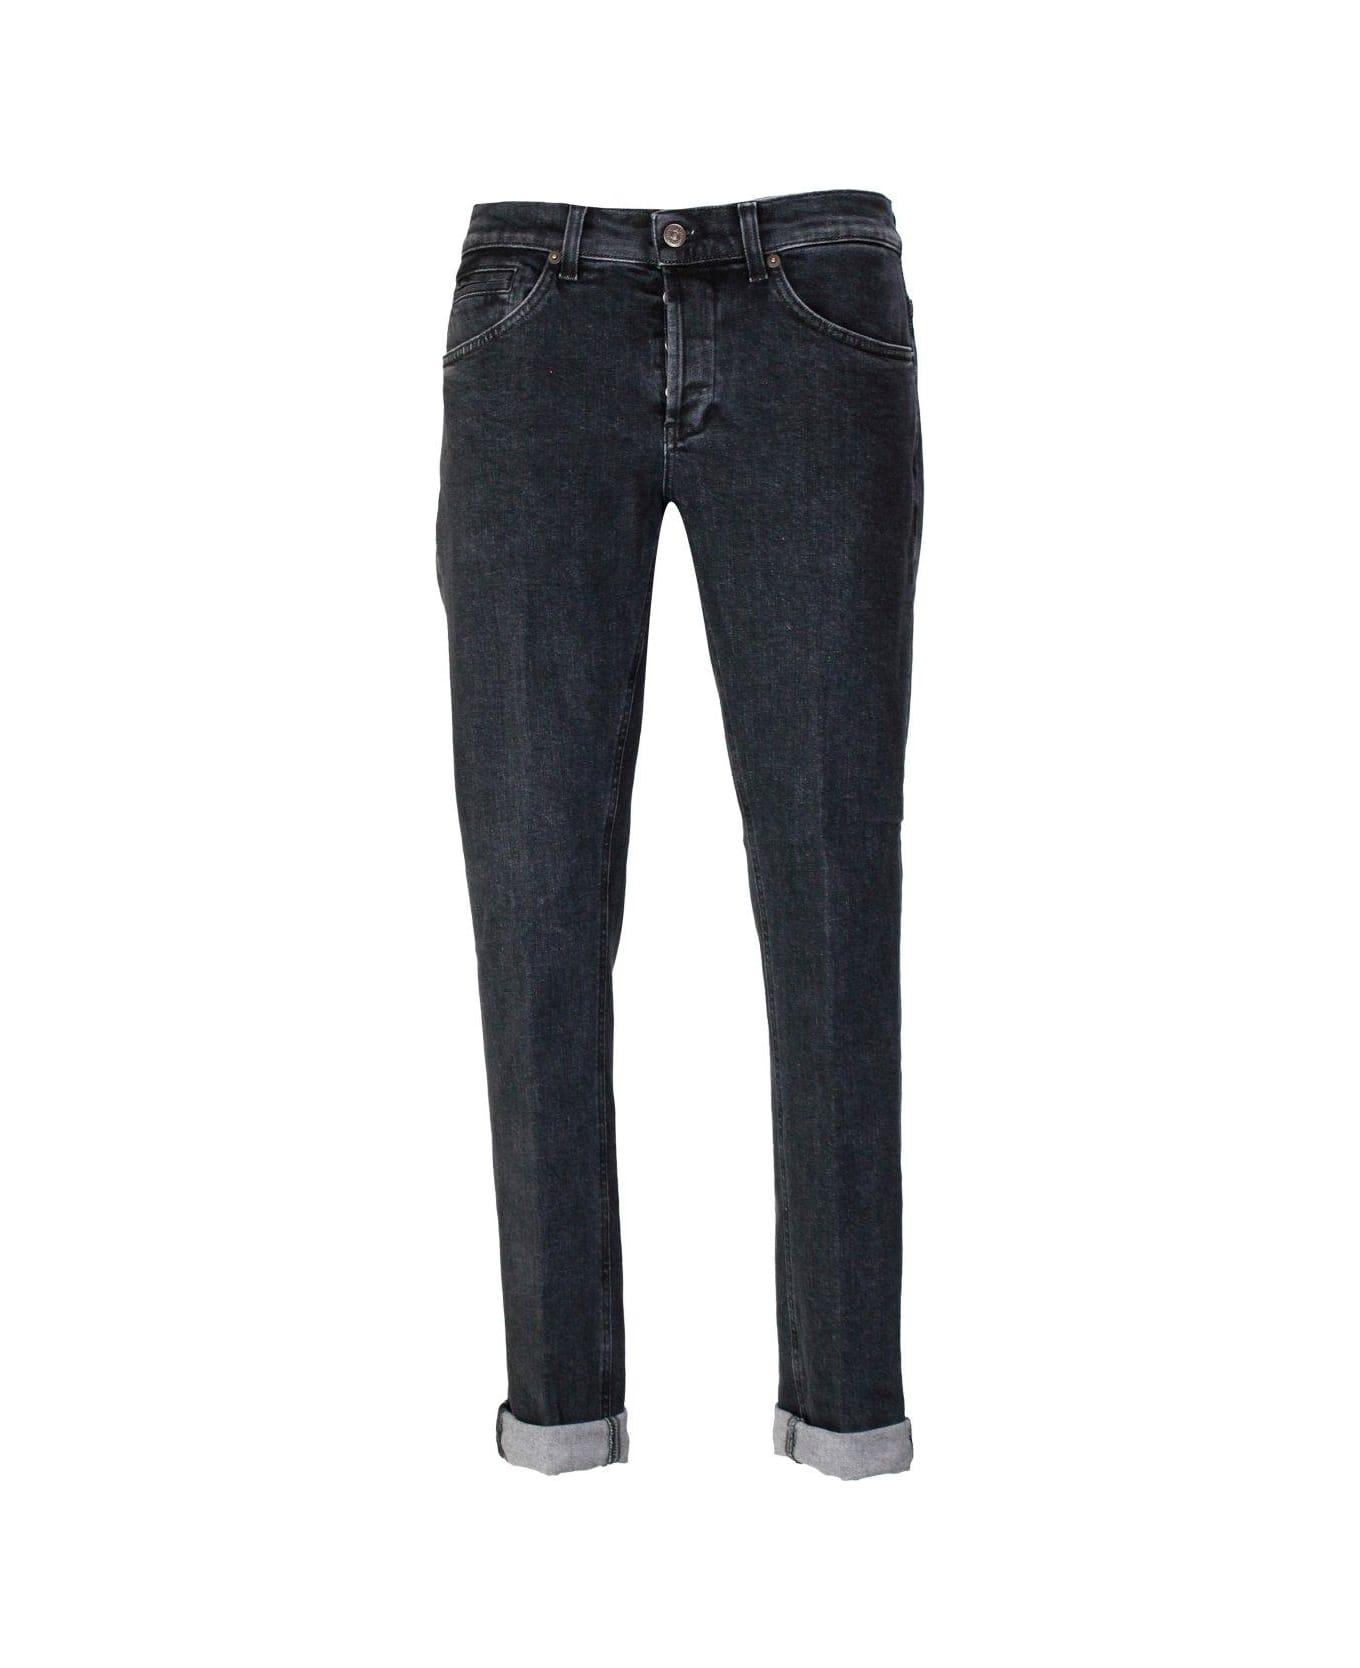 Dondup Turn-up Cuffs Stretched Jeans Dondup - BLACK デニム